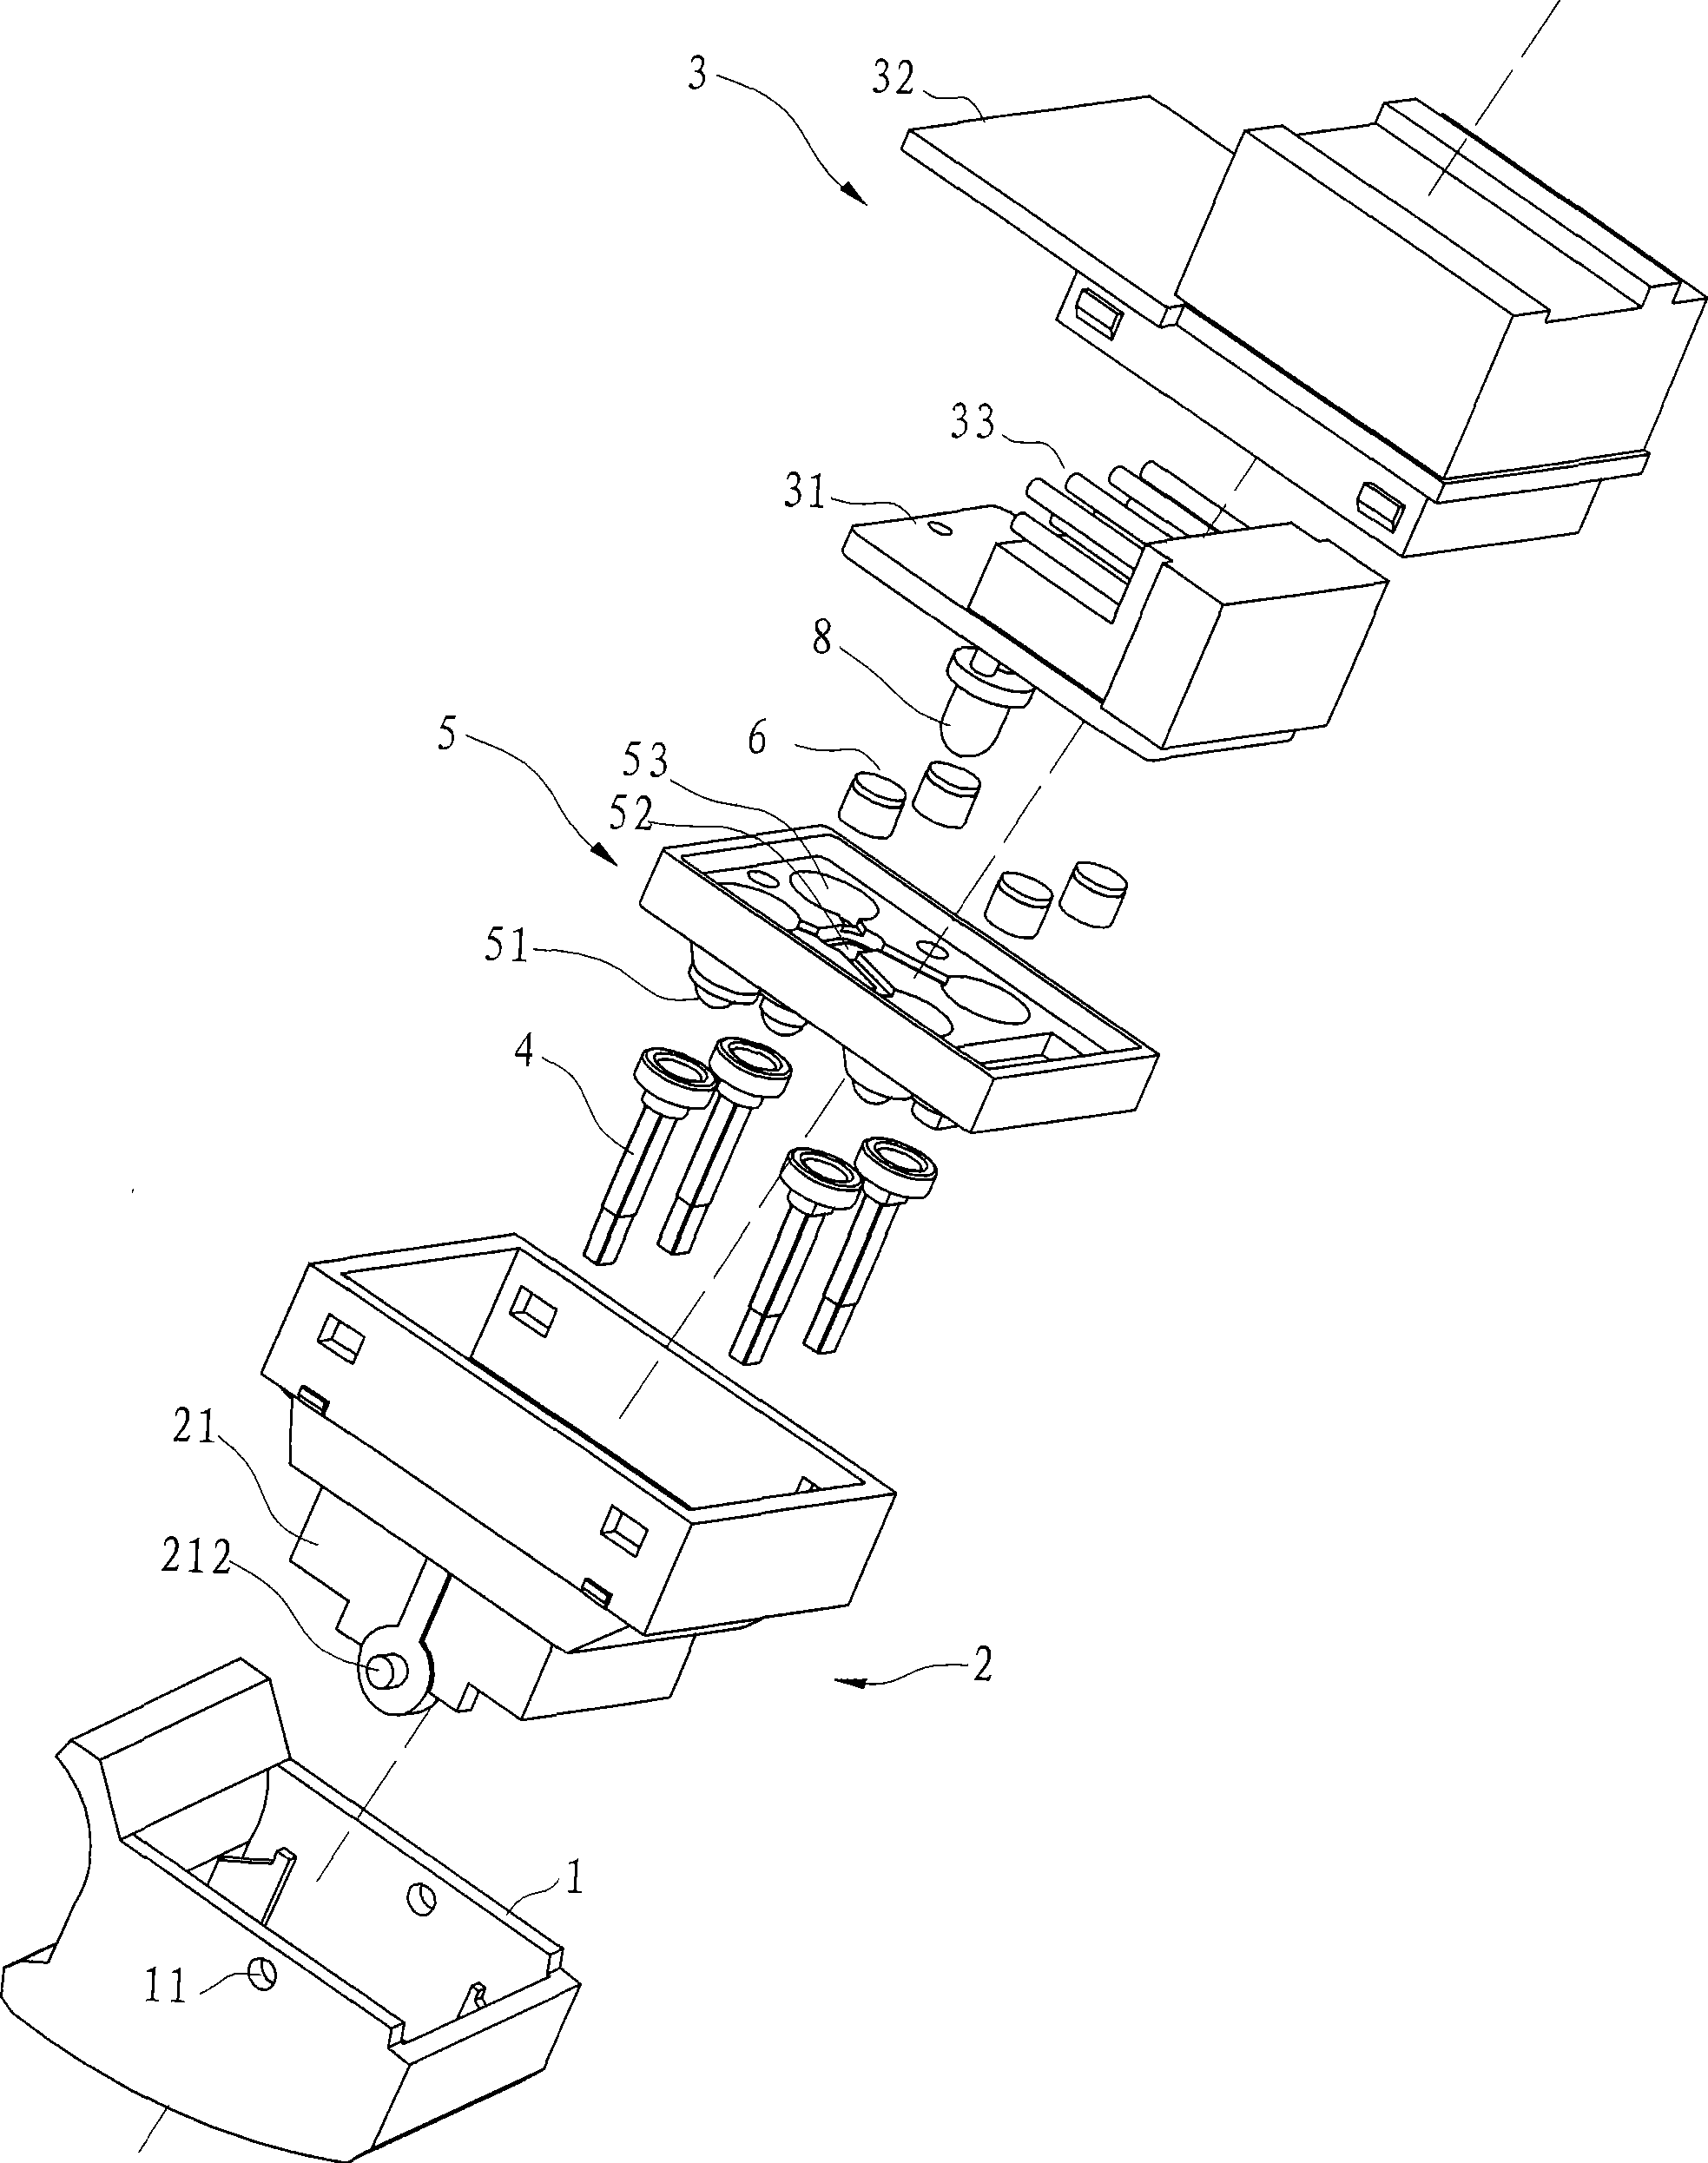 Independent switch of lifter for vehicle windscreen